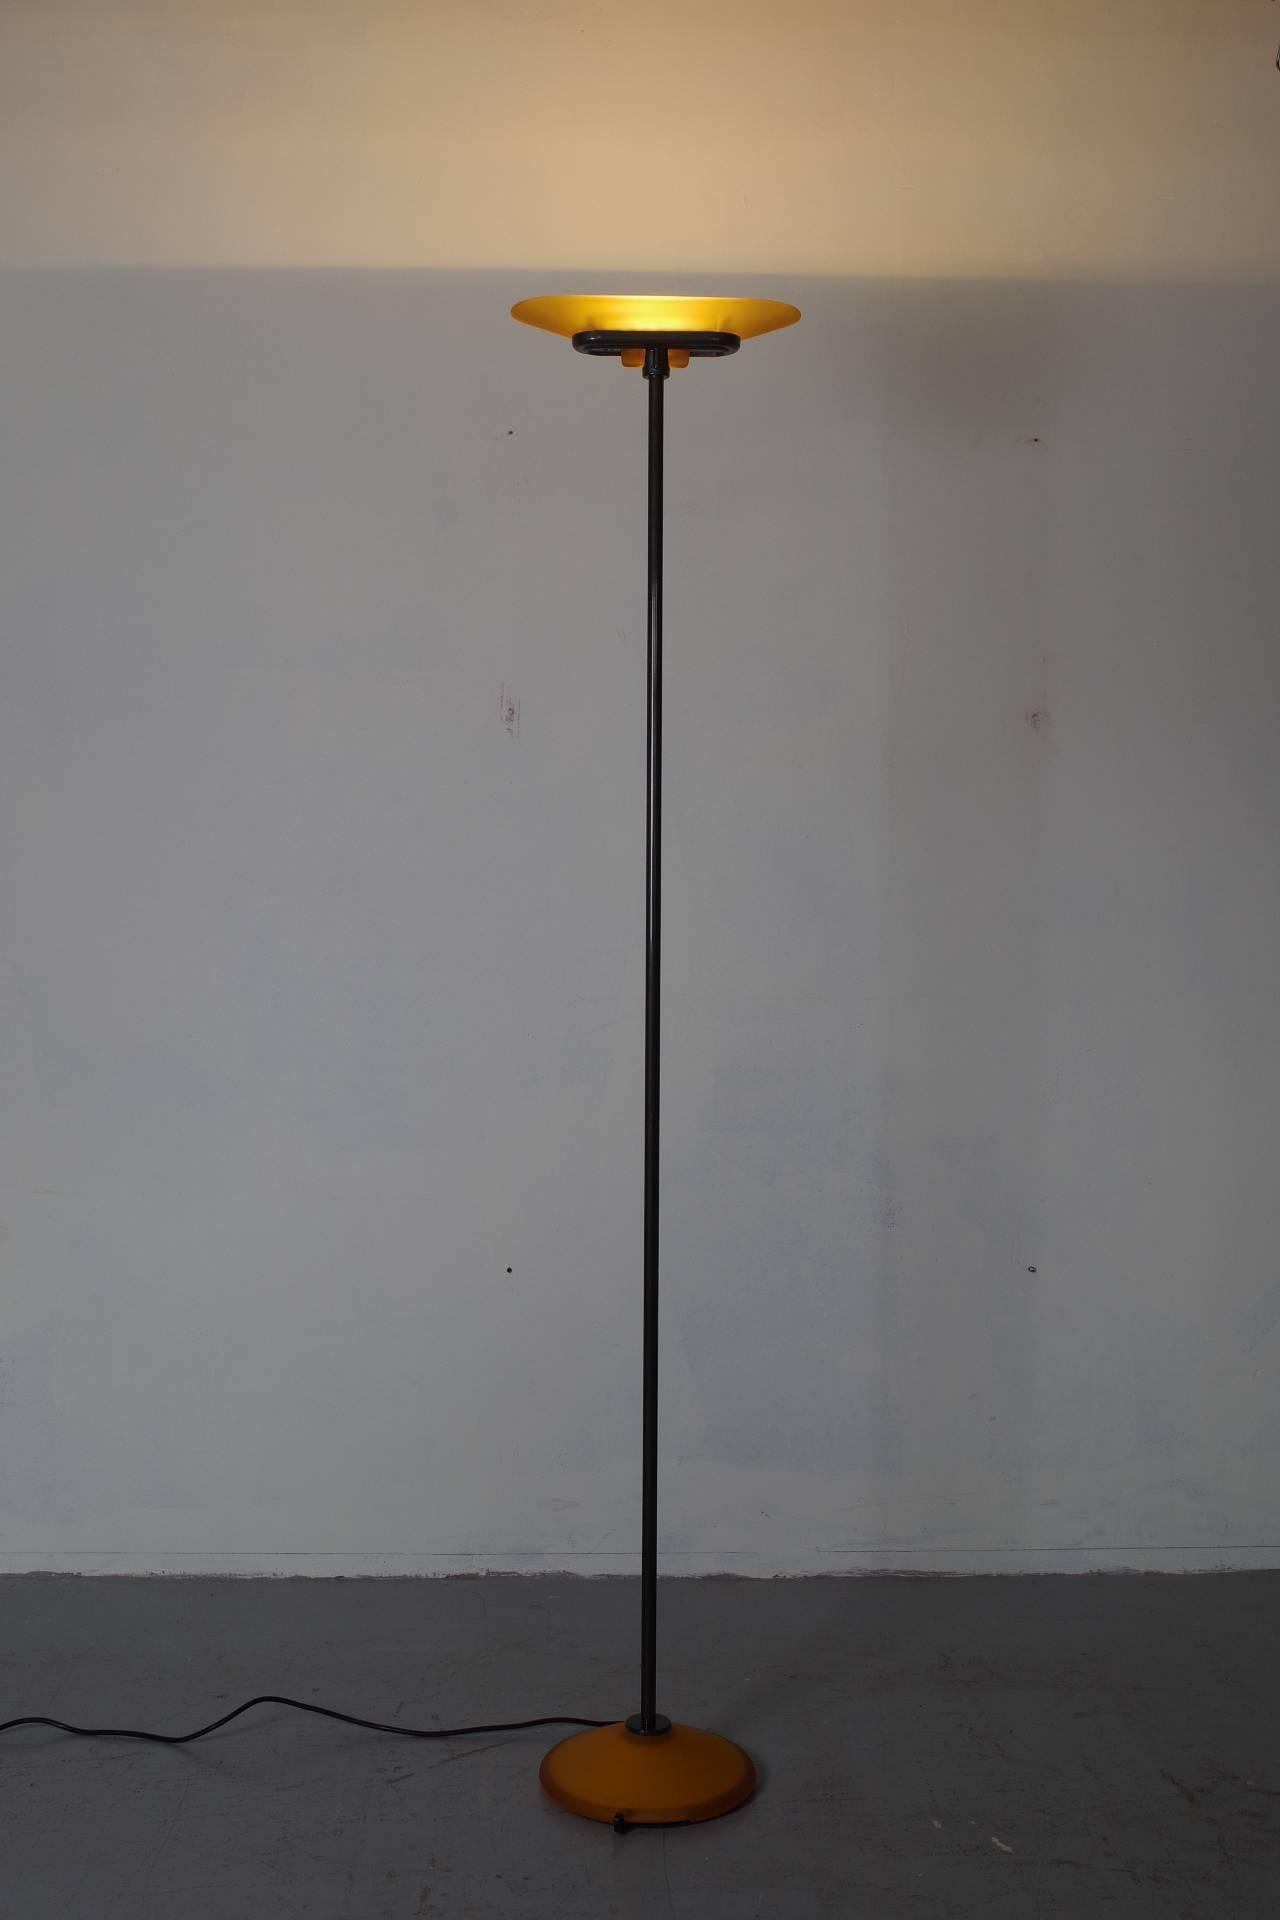 Beautiful stylish uplighter from Artemide with amber glass shade and base. The light can be dimmed by the black handle on the base (see last picture). The iron parts are powder coated in anthracite black.